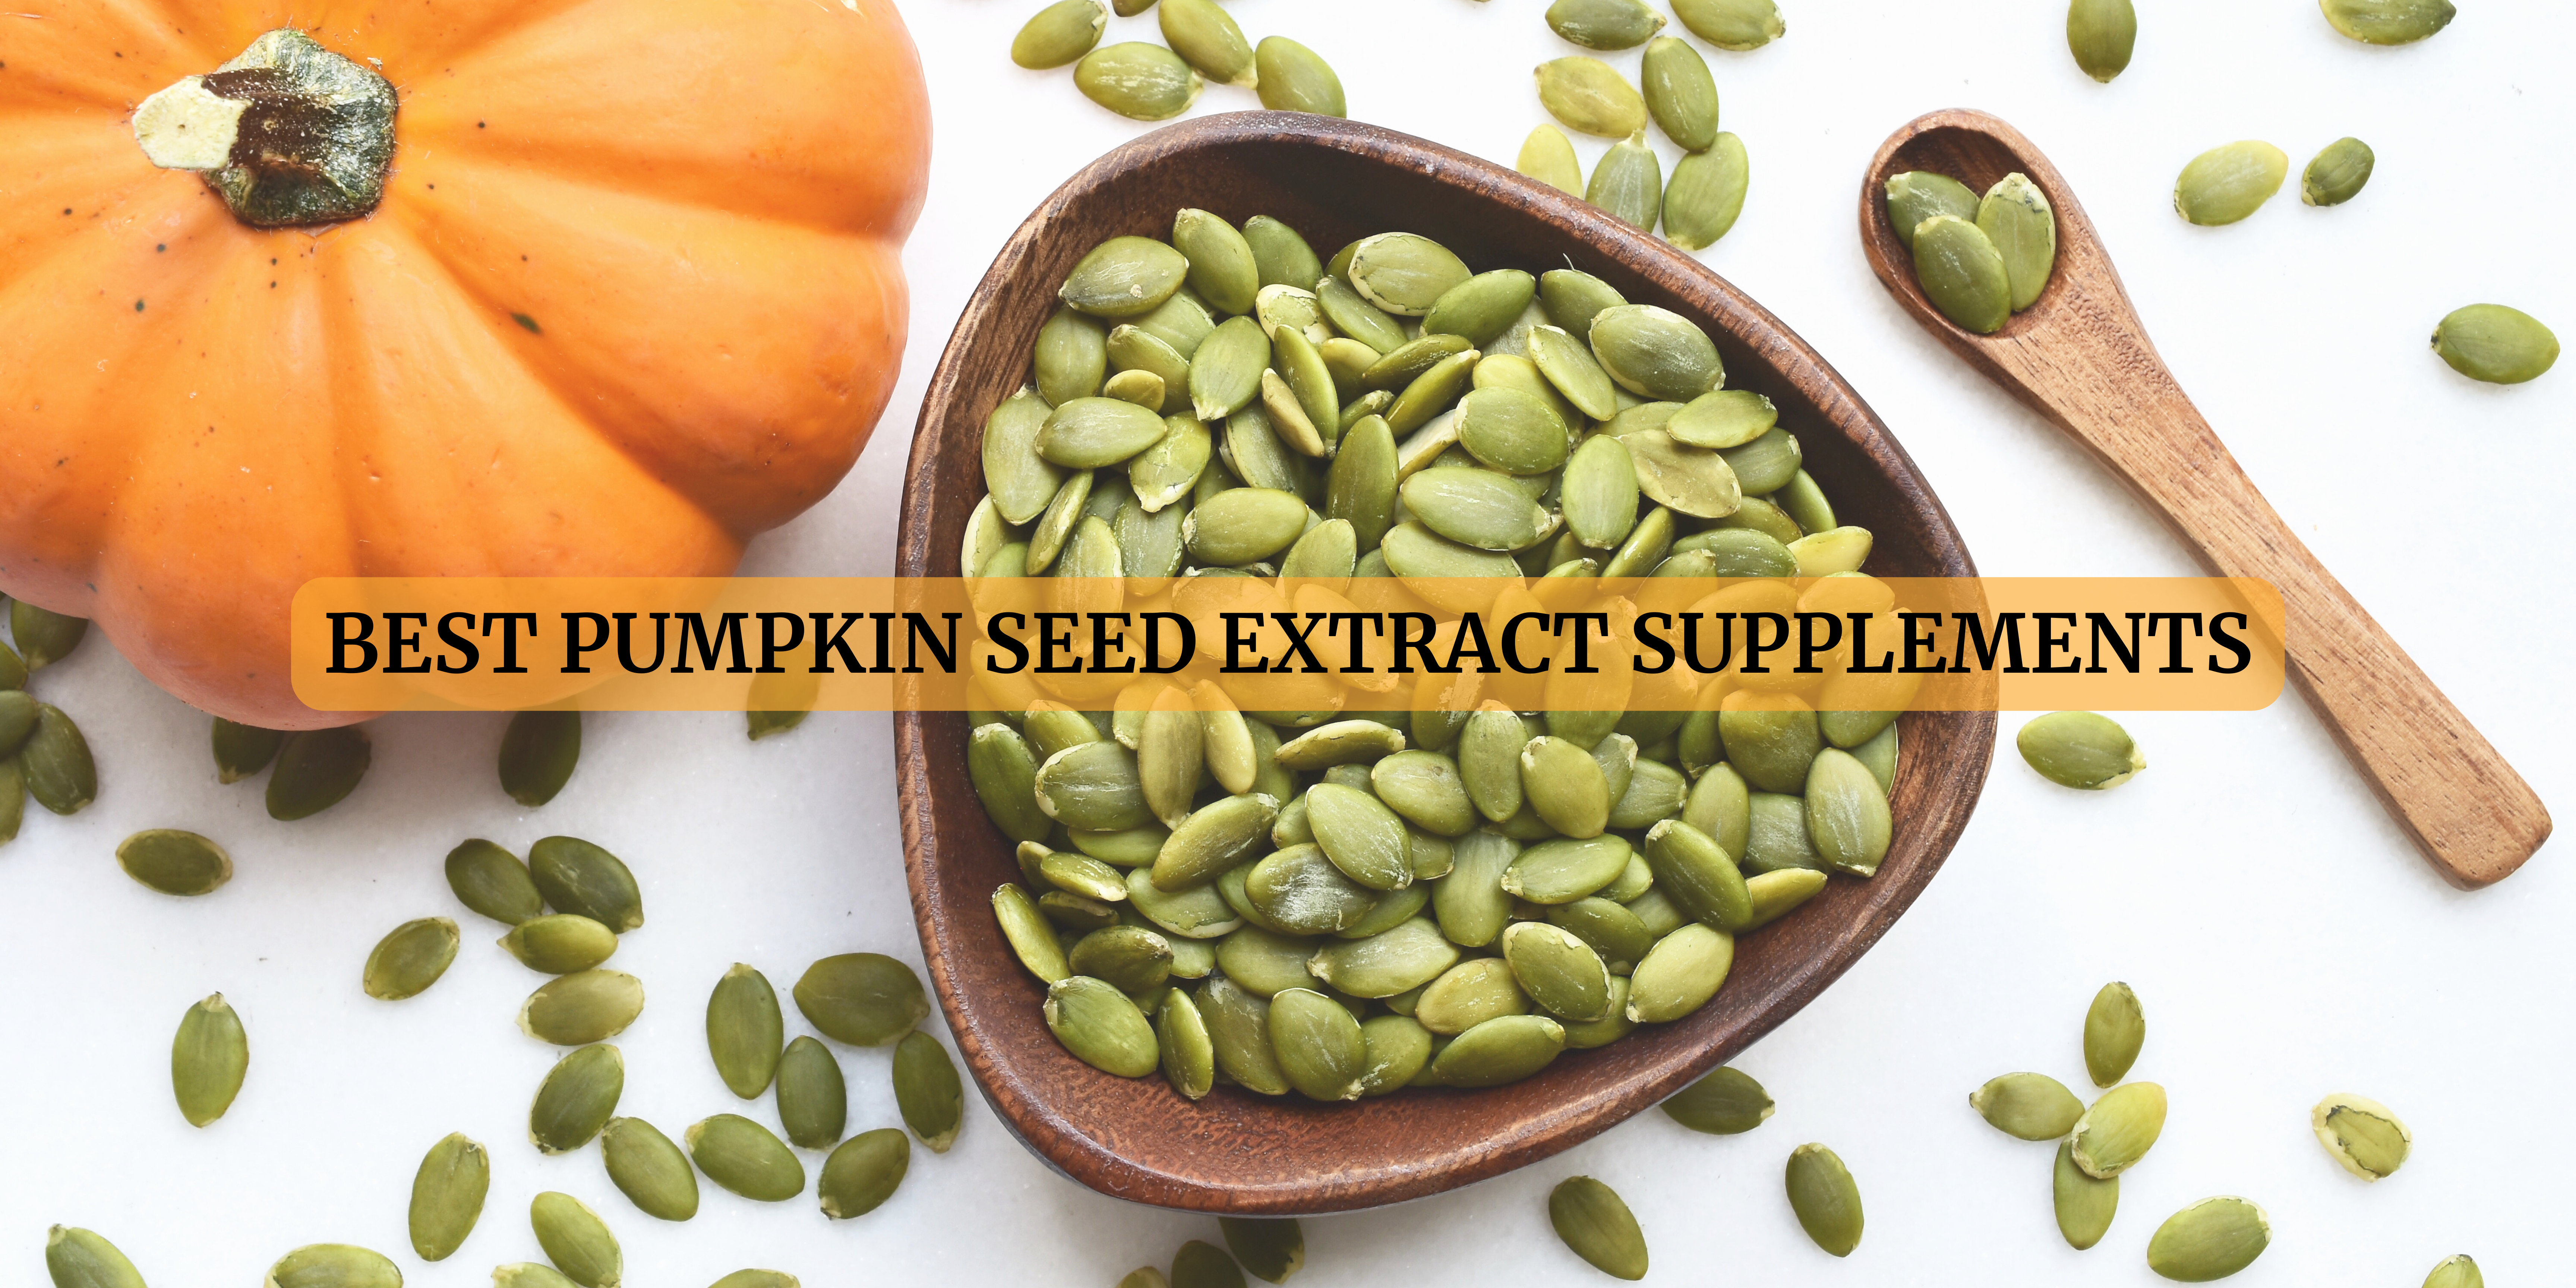 pumpkin seed extract supplements in Spain